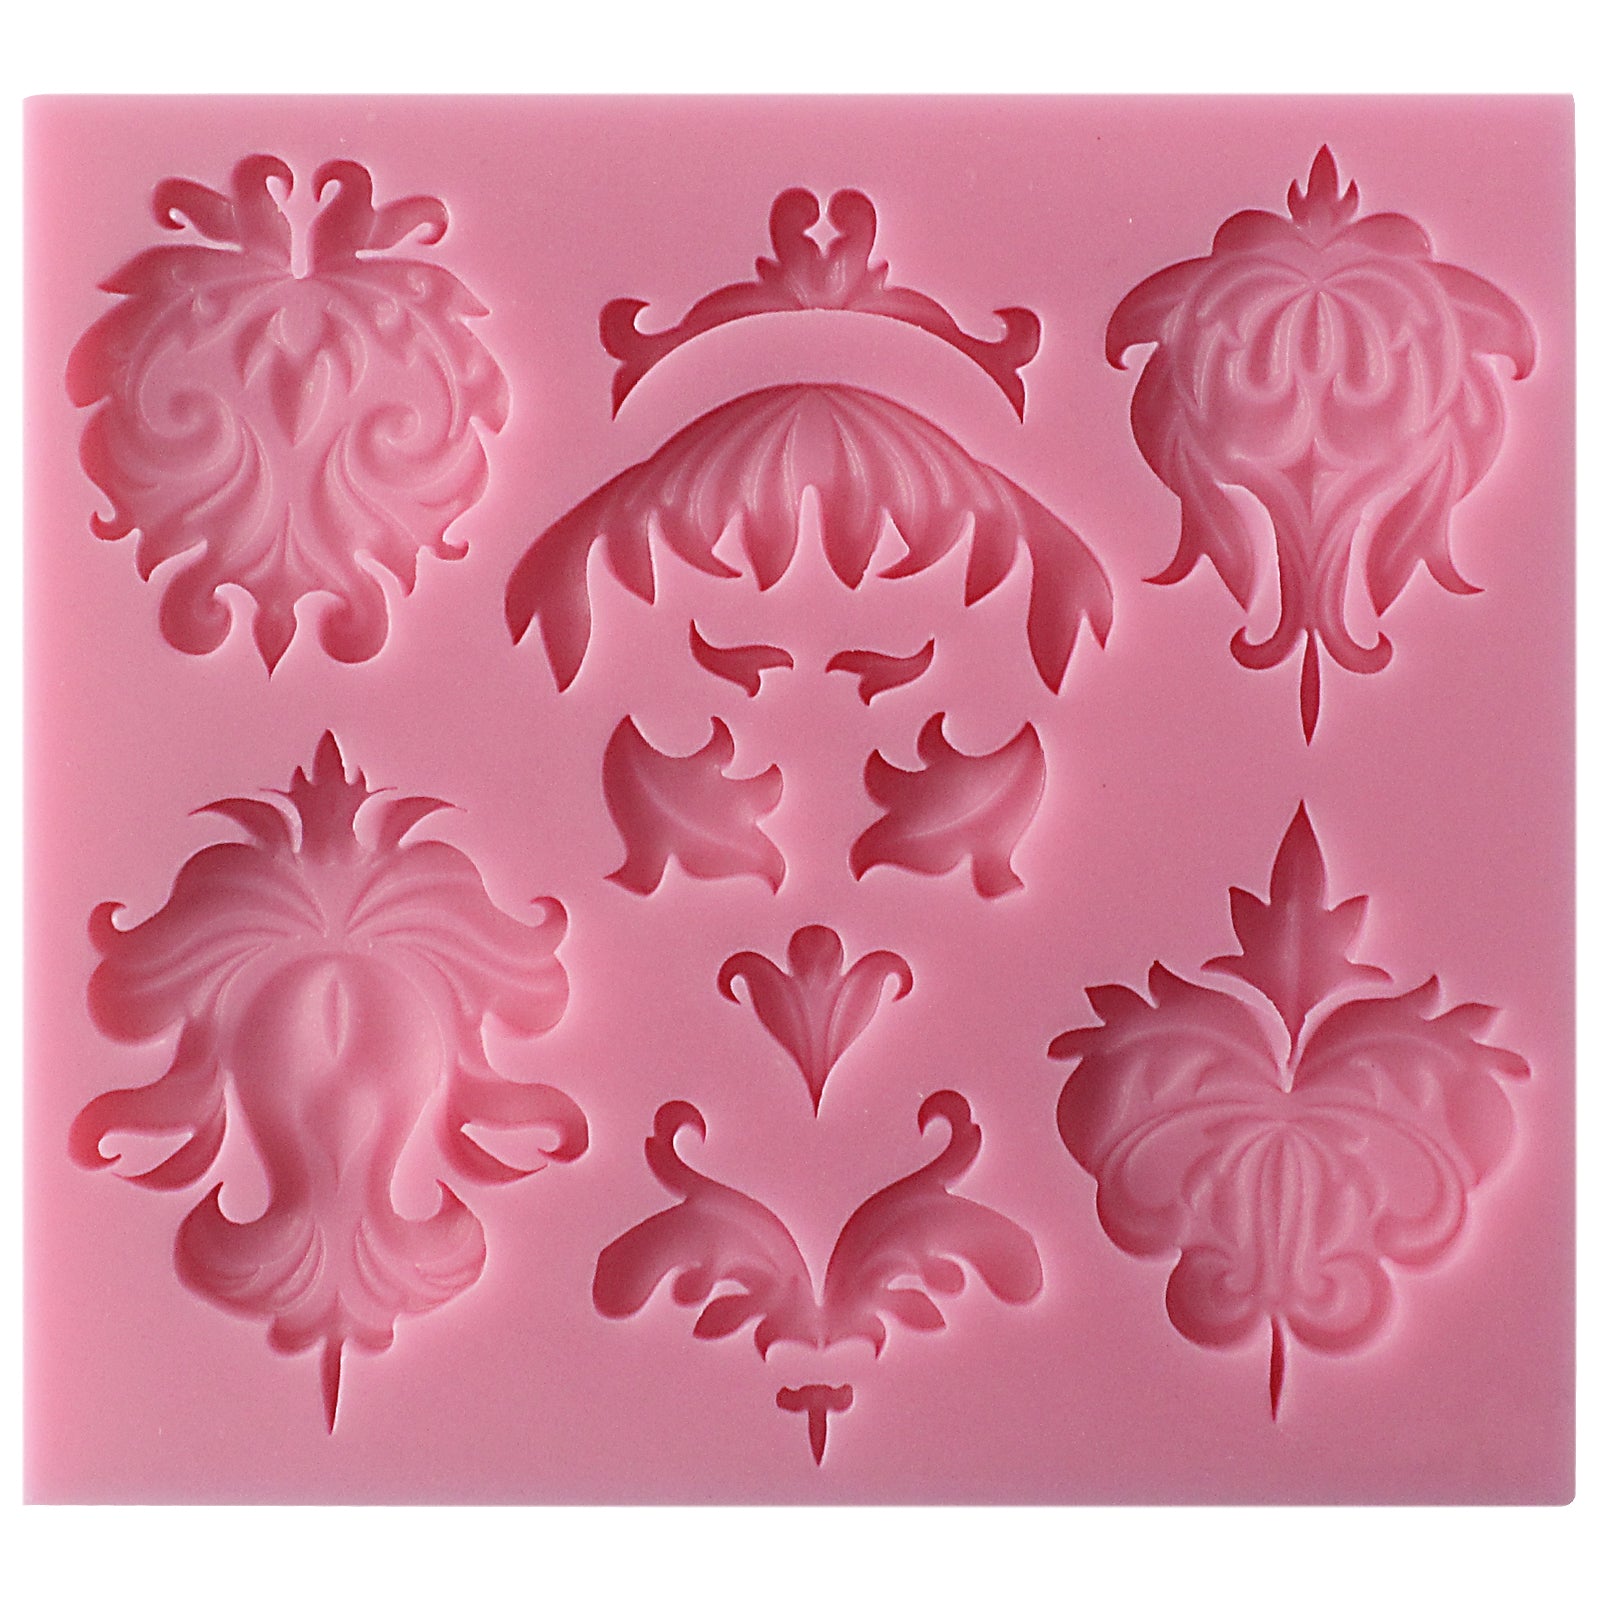 Baroque Floral Fire and Lace Silicone Mold